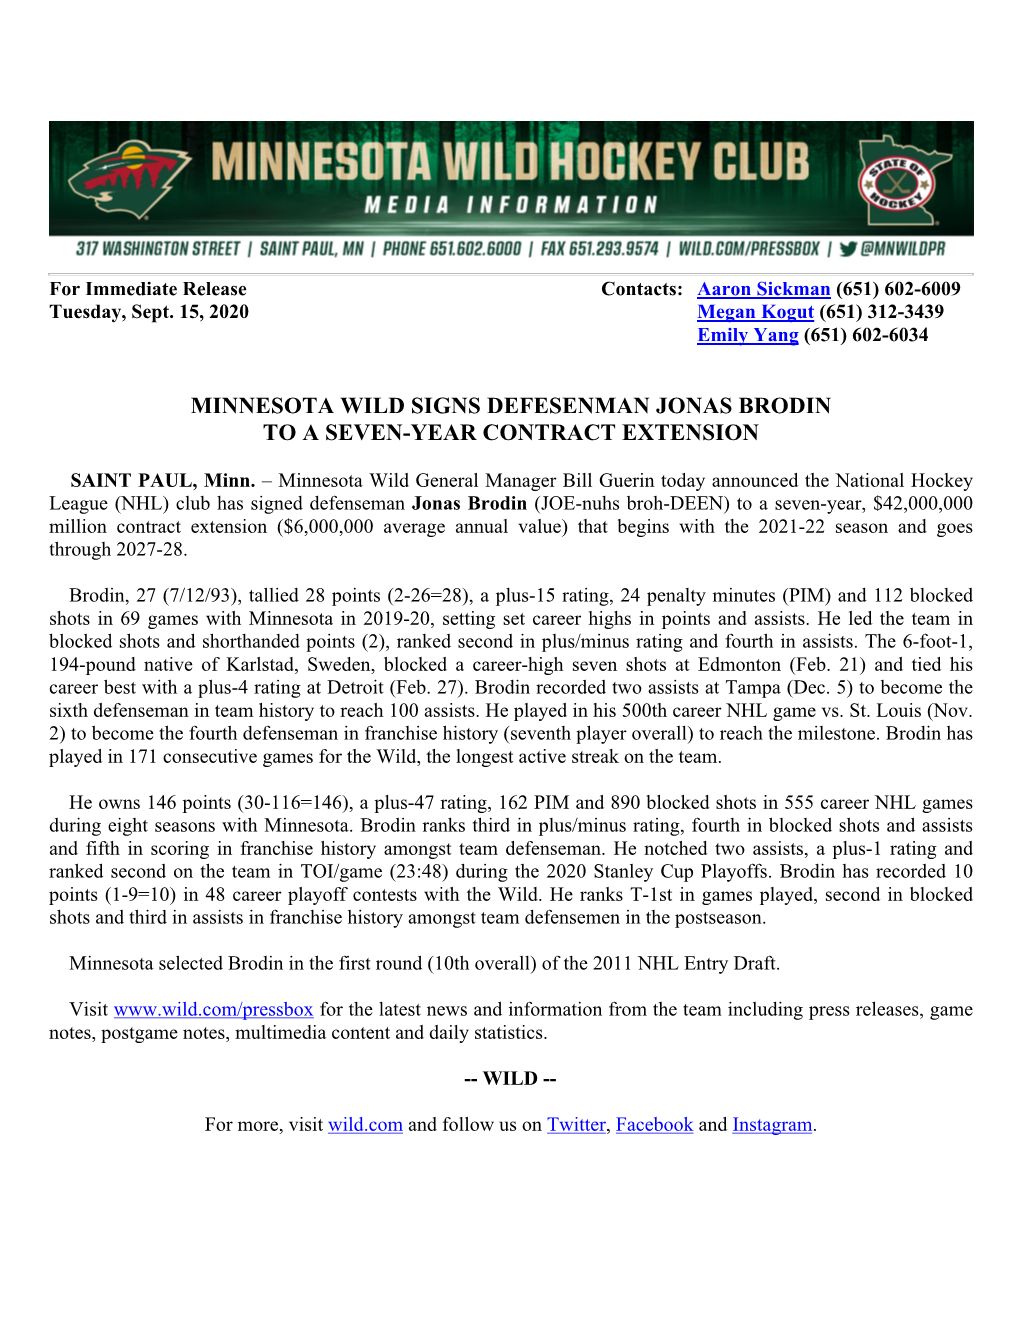 Minnesota Wild Signs Defesenman Jonas Brodin to a Seven-Year Contract Extension